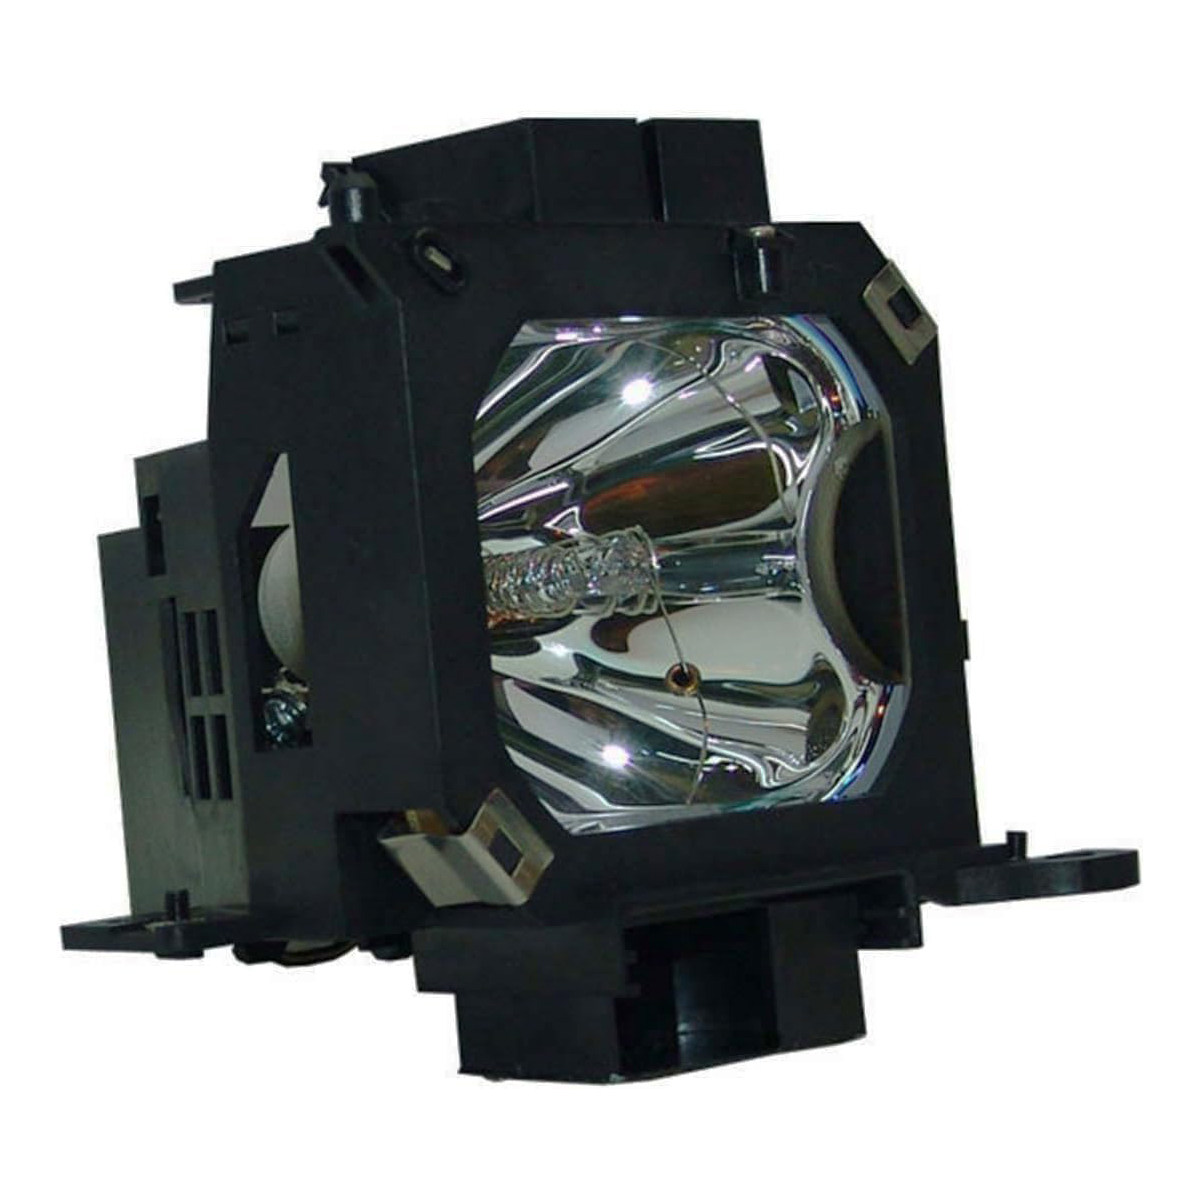 Replacement Projector lamp ELPLP22 For Epson EMP-7800 EMP-7850 EMP-7900